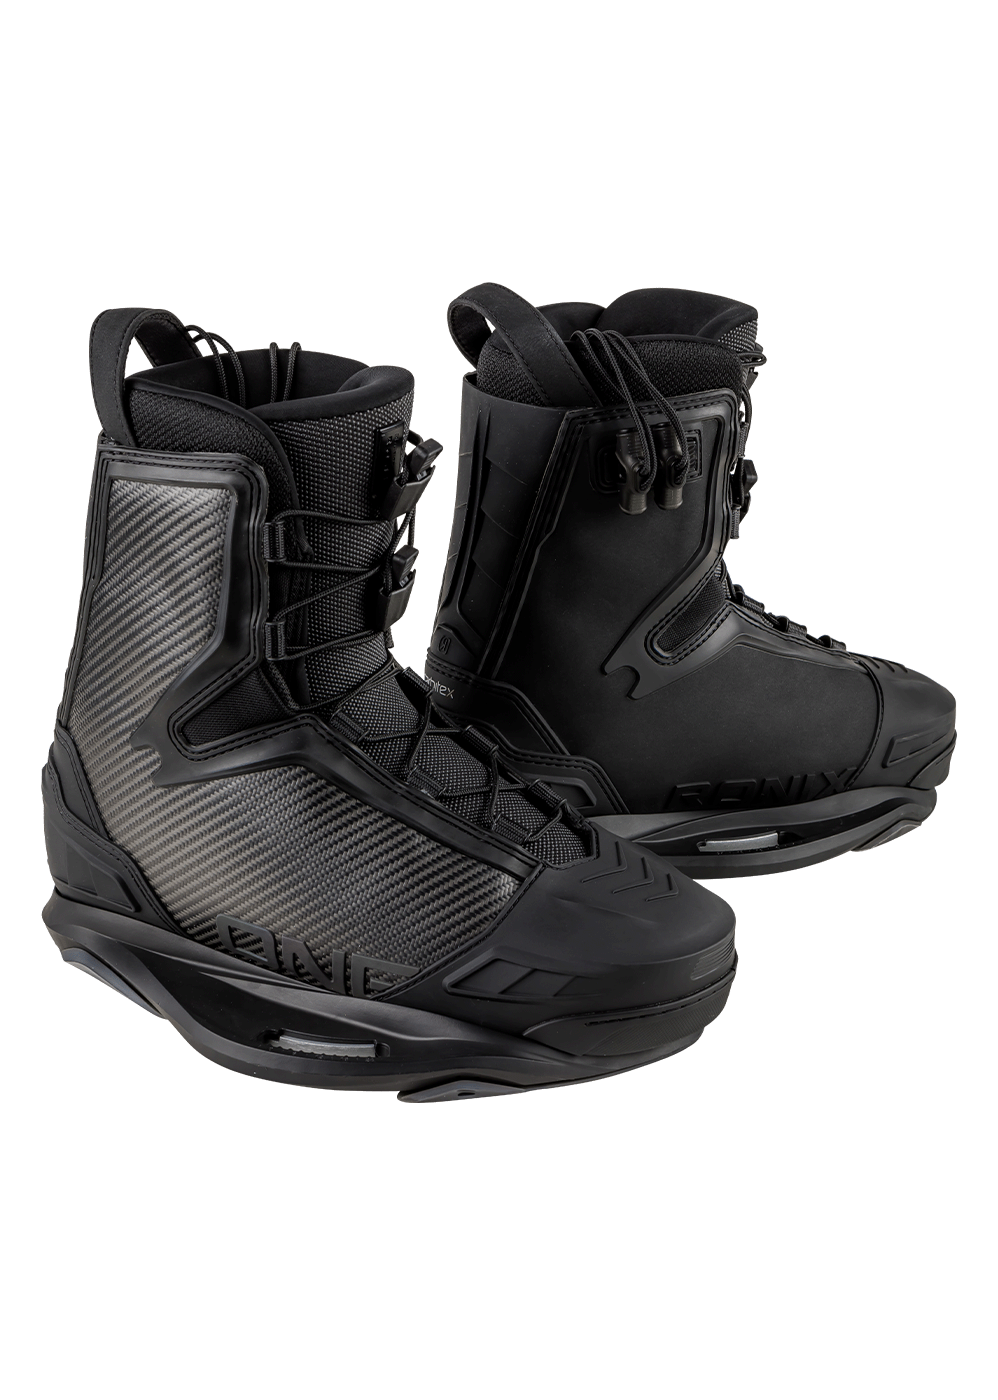 Ronix One Carbitex Intuition Wakeboard Boots